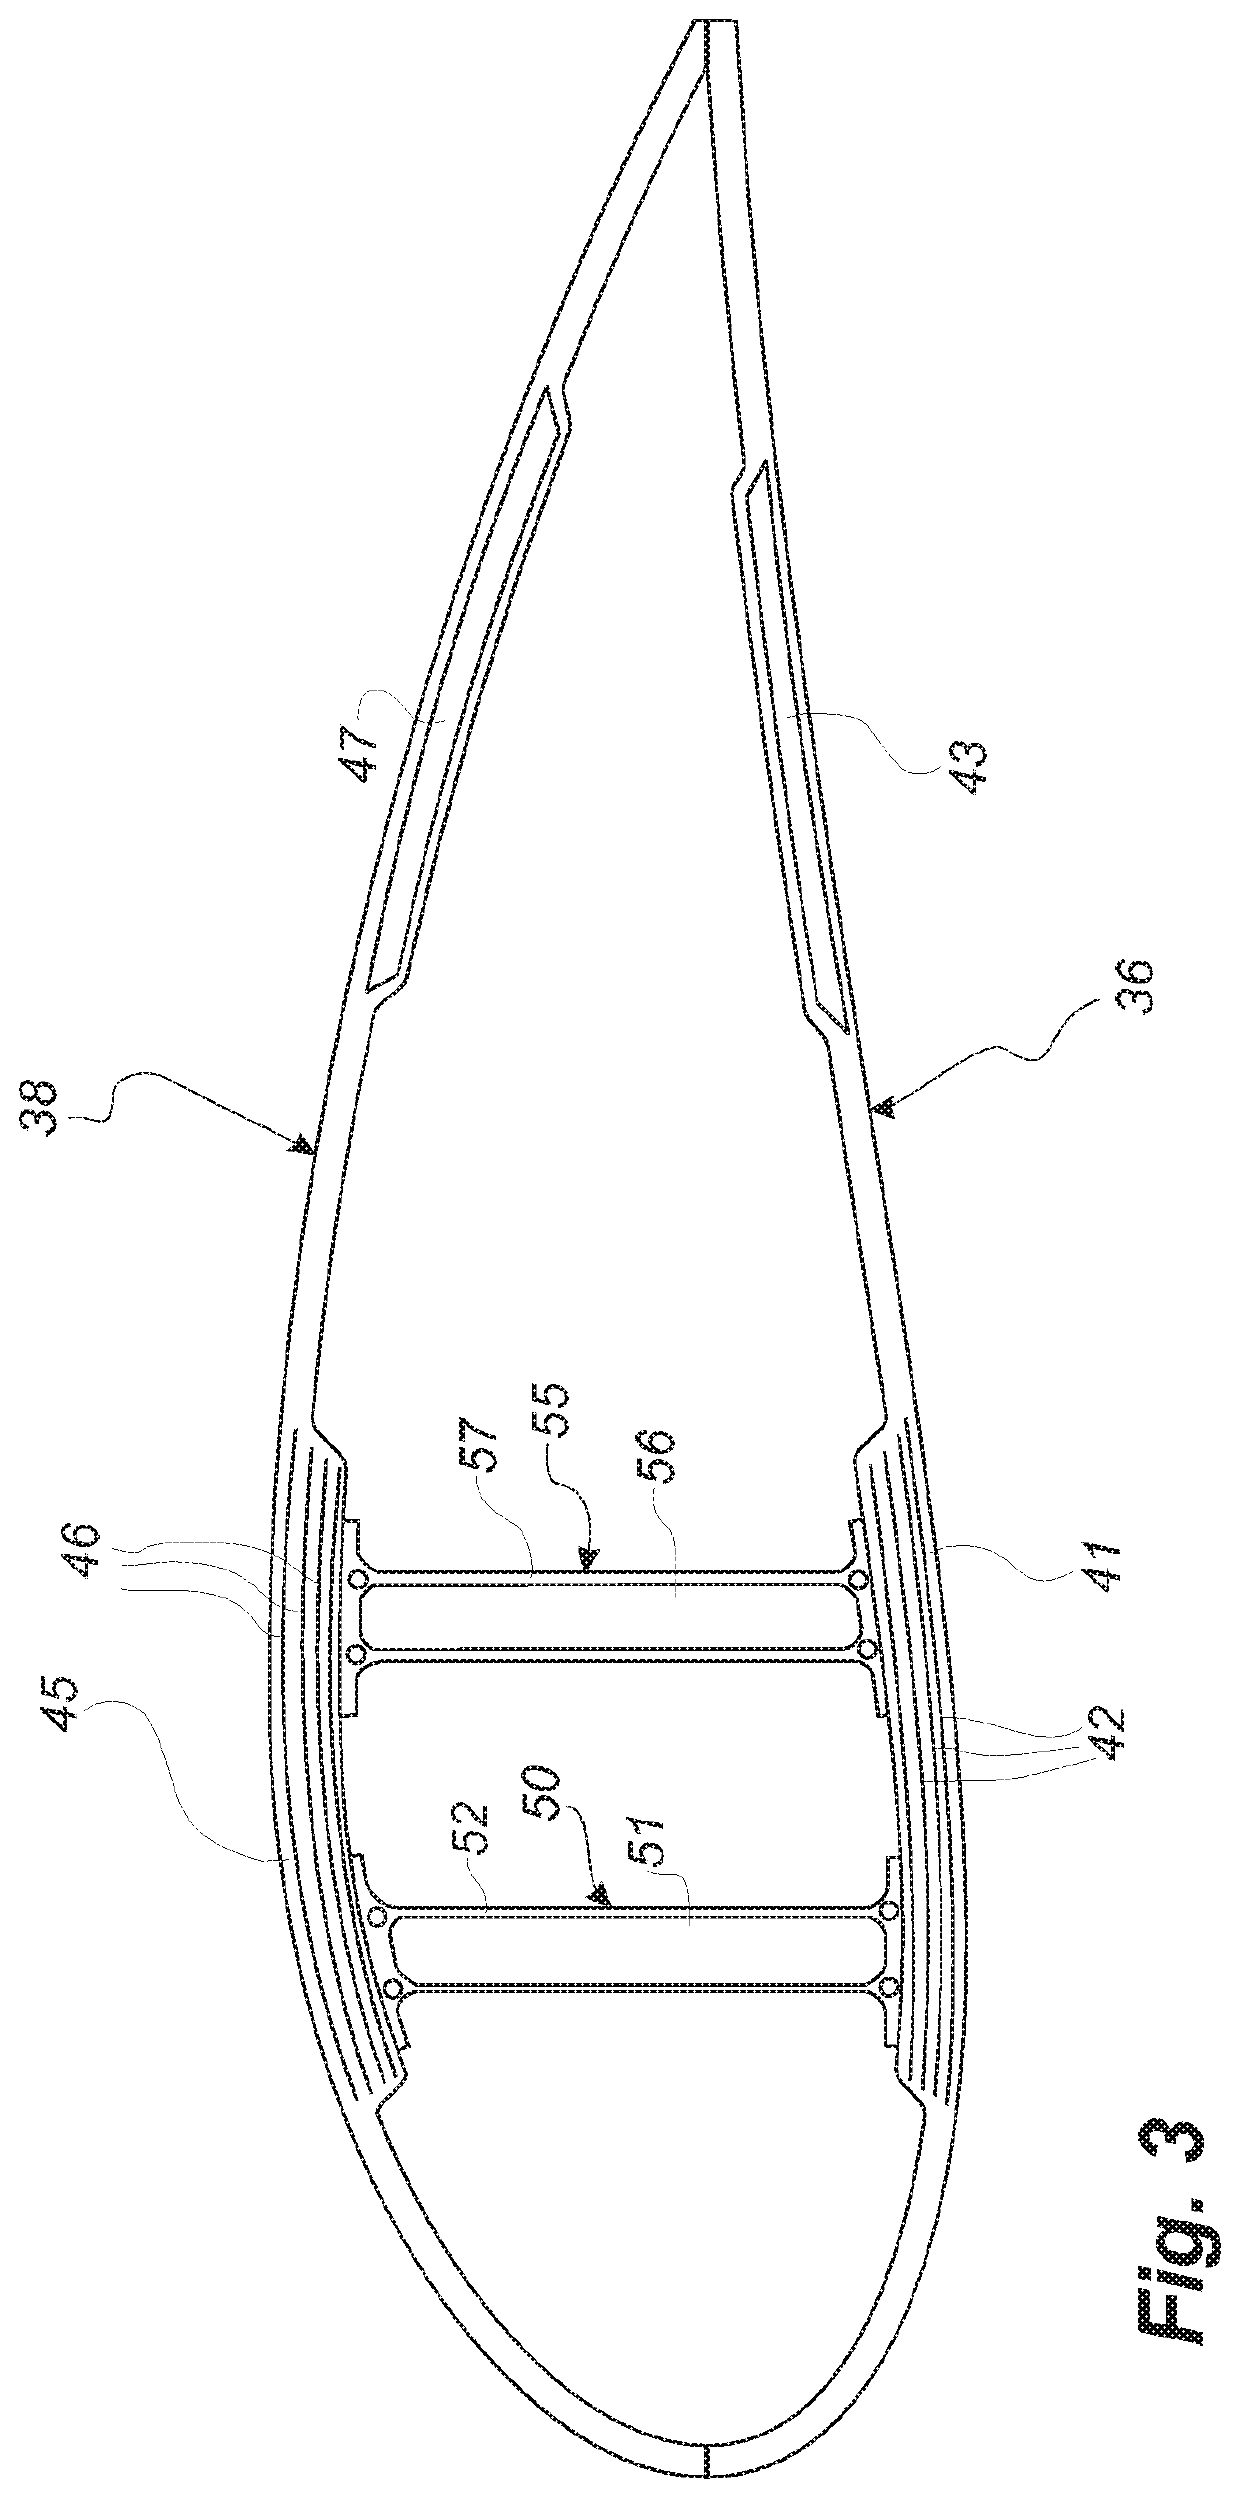 Method of manufacturing a composite laminate structure